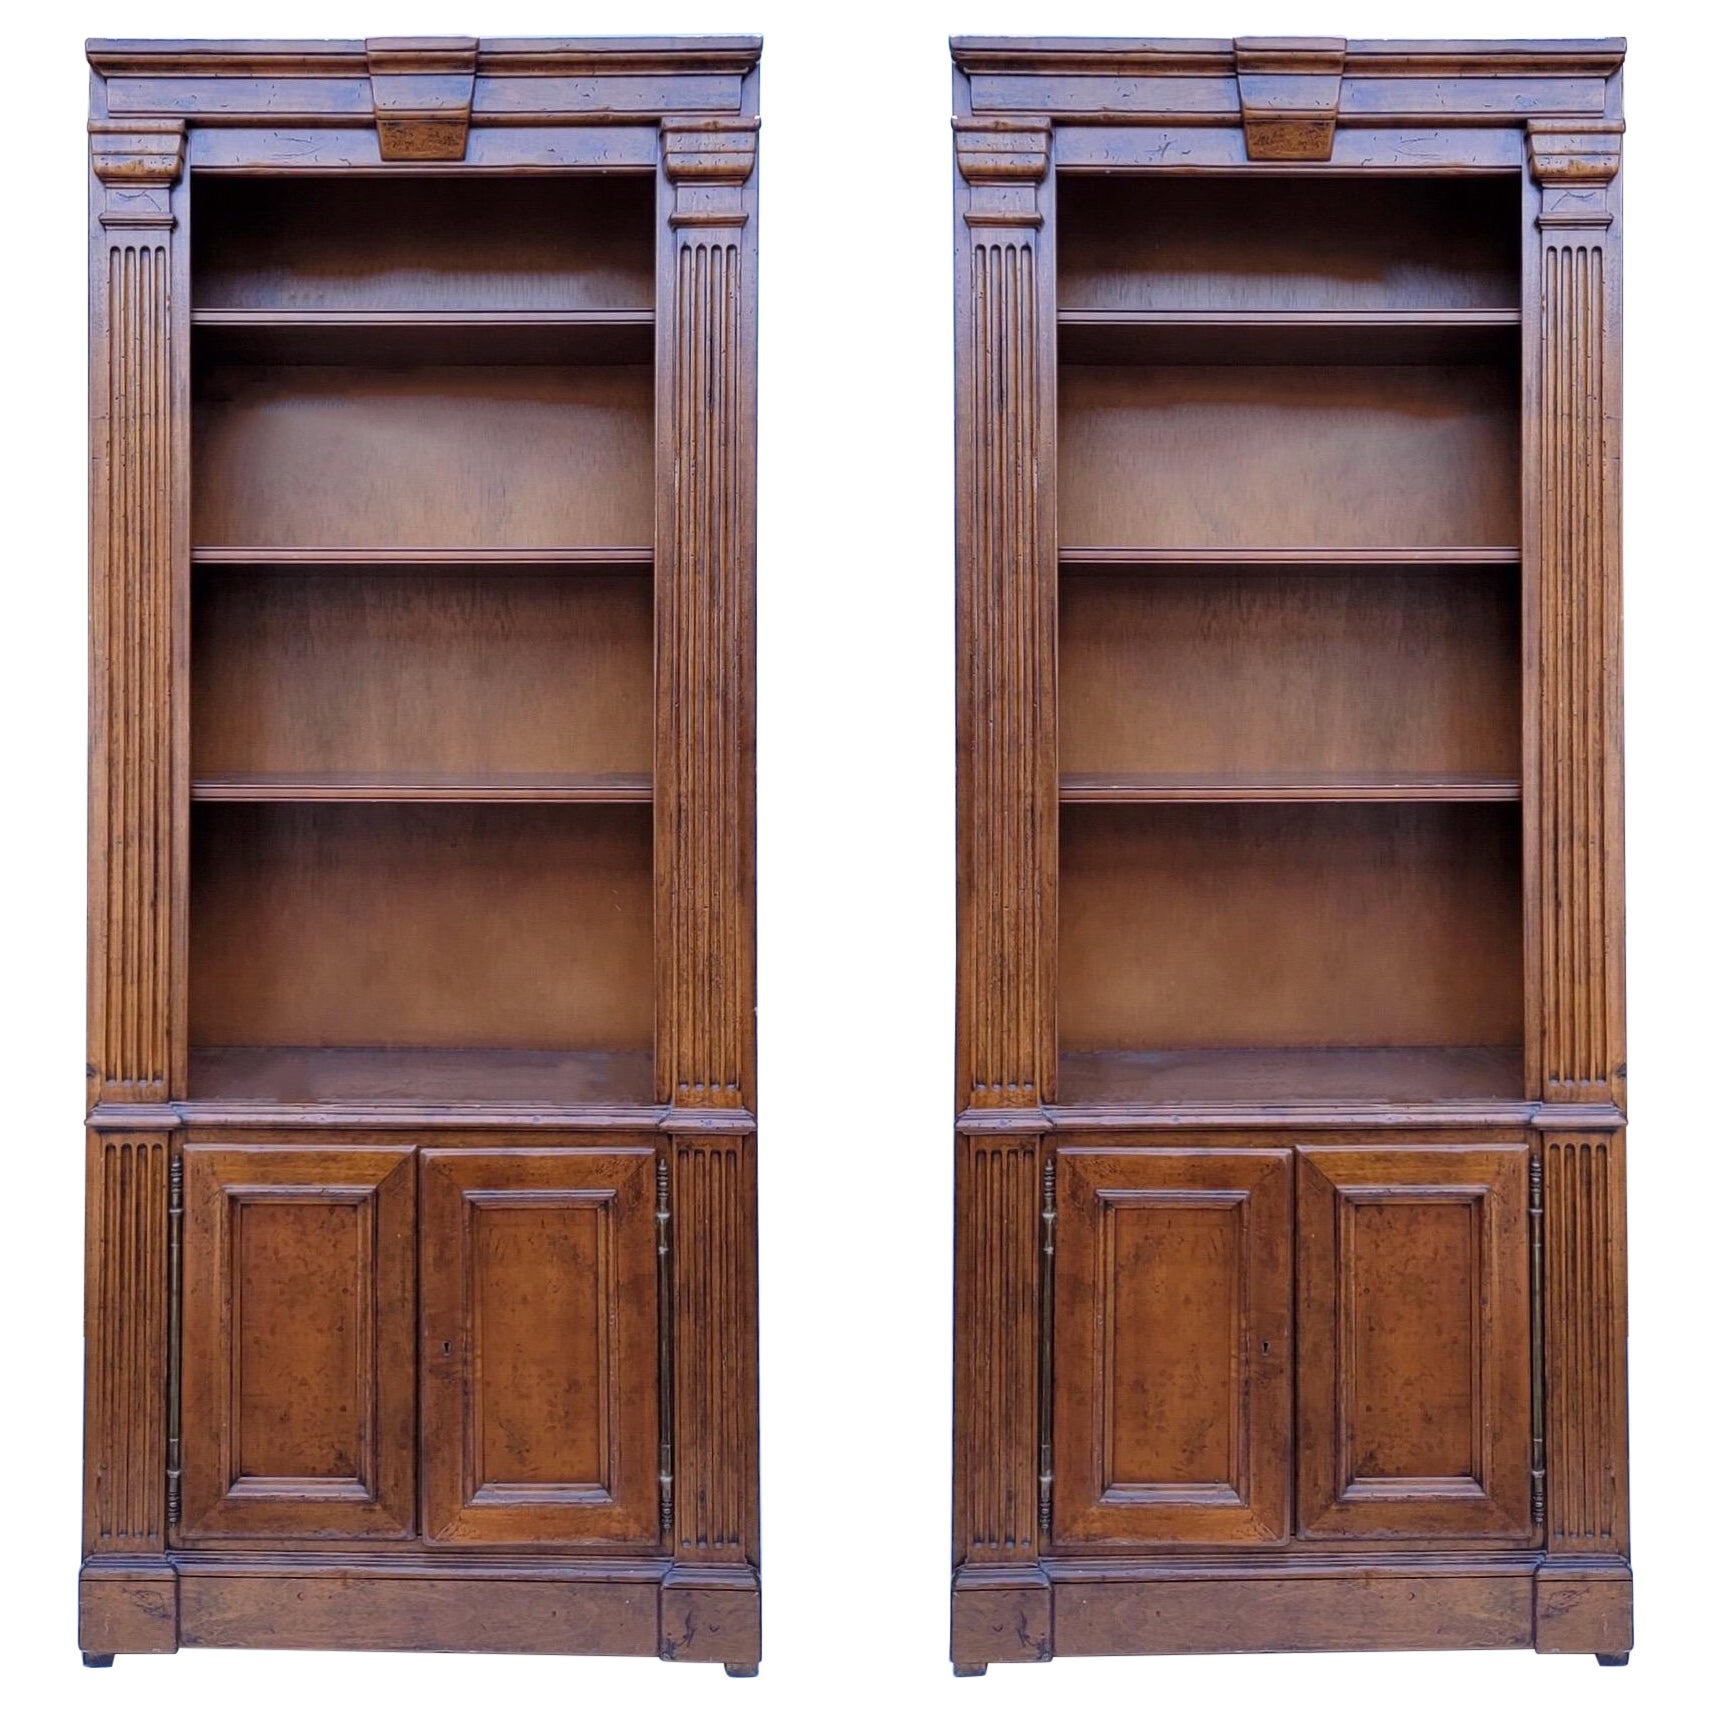 French Neo-Classical Italian Carved Walnut Bookcases for Bloomingdales, Pair